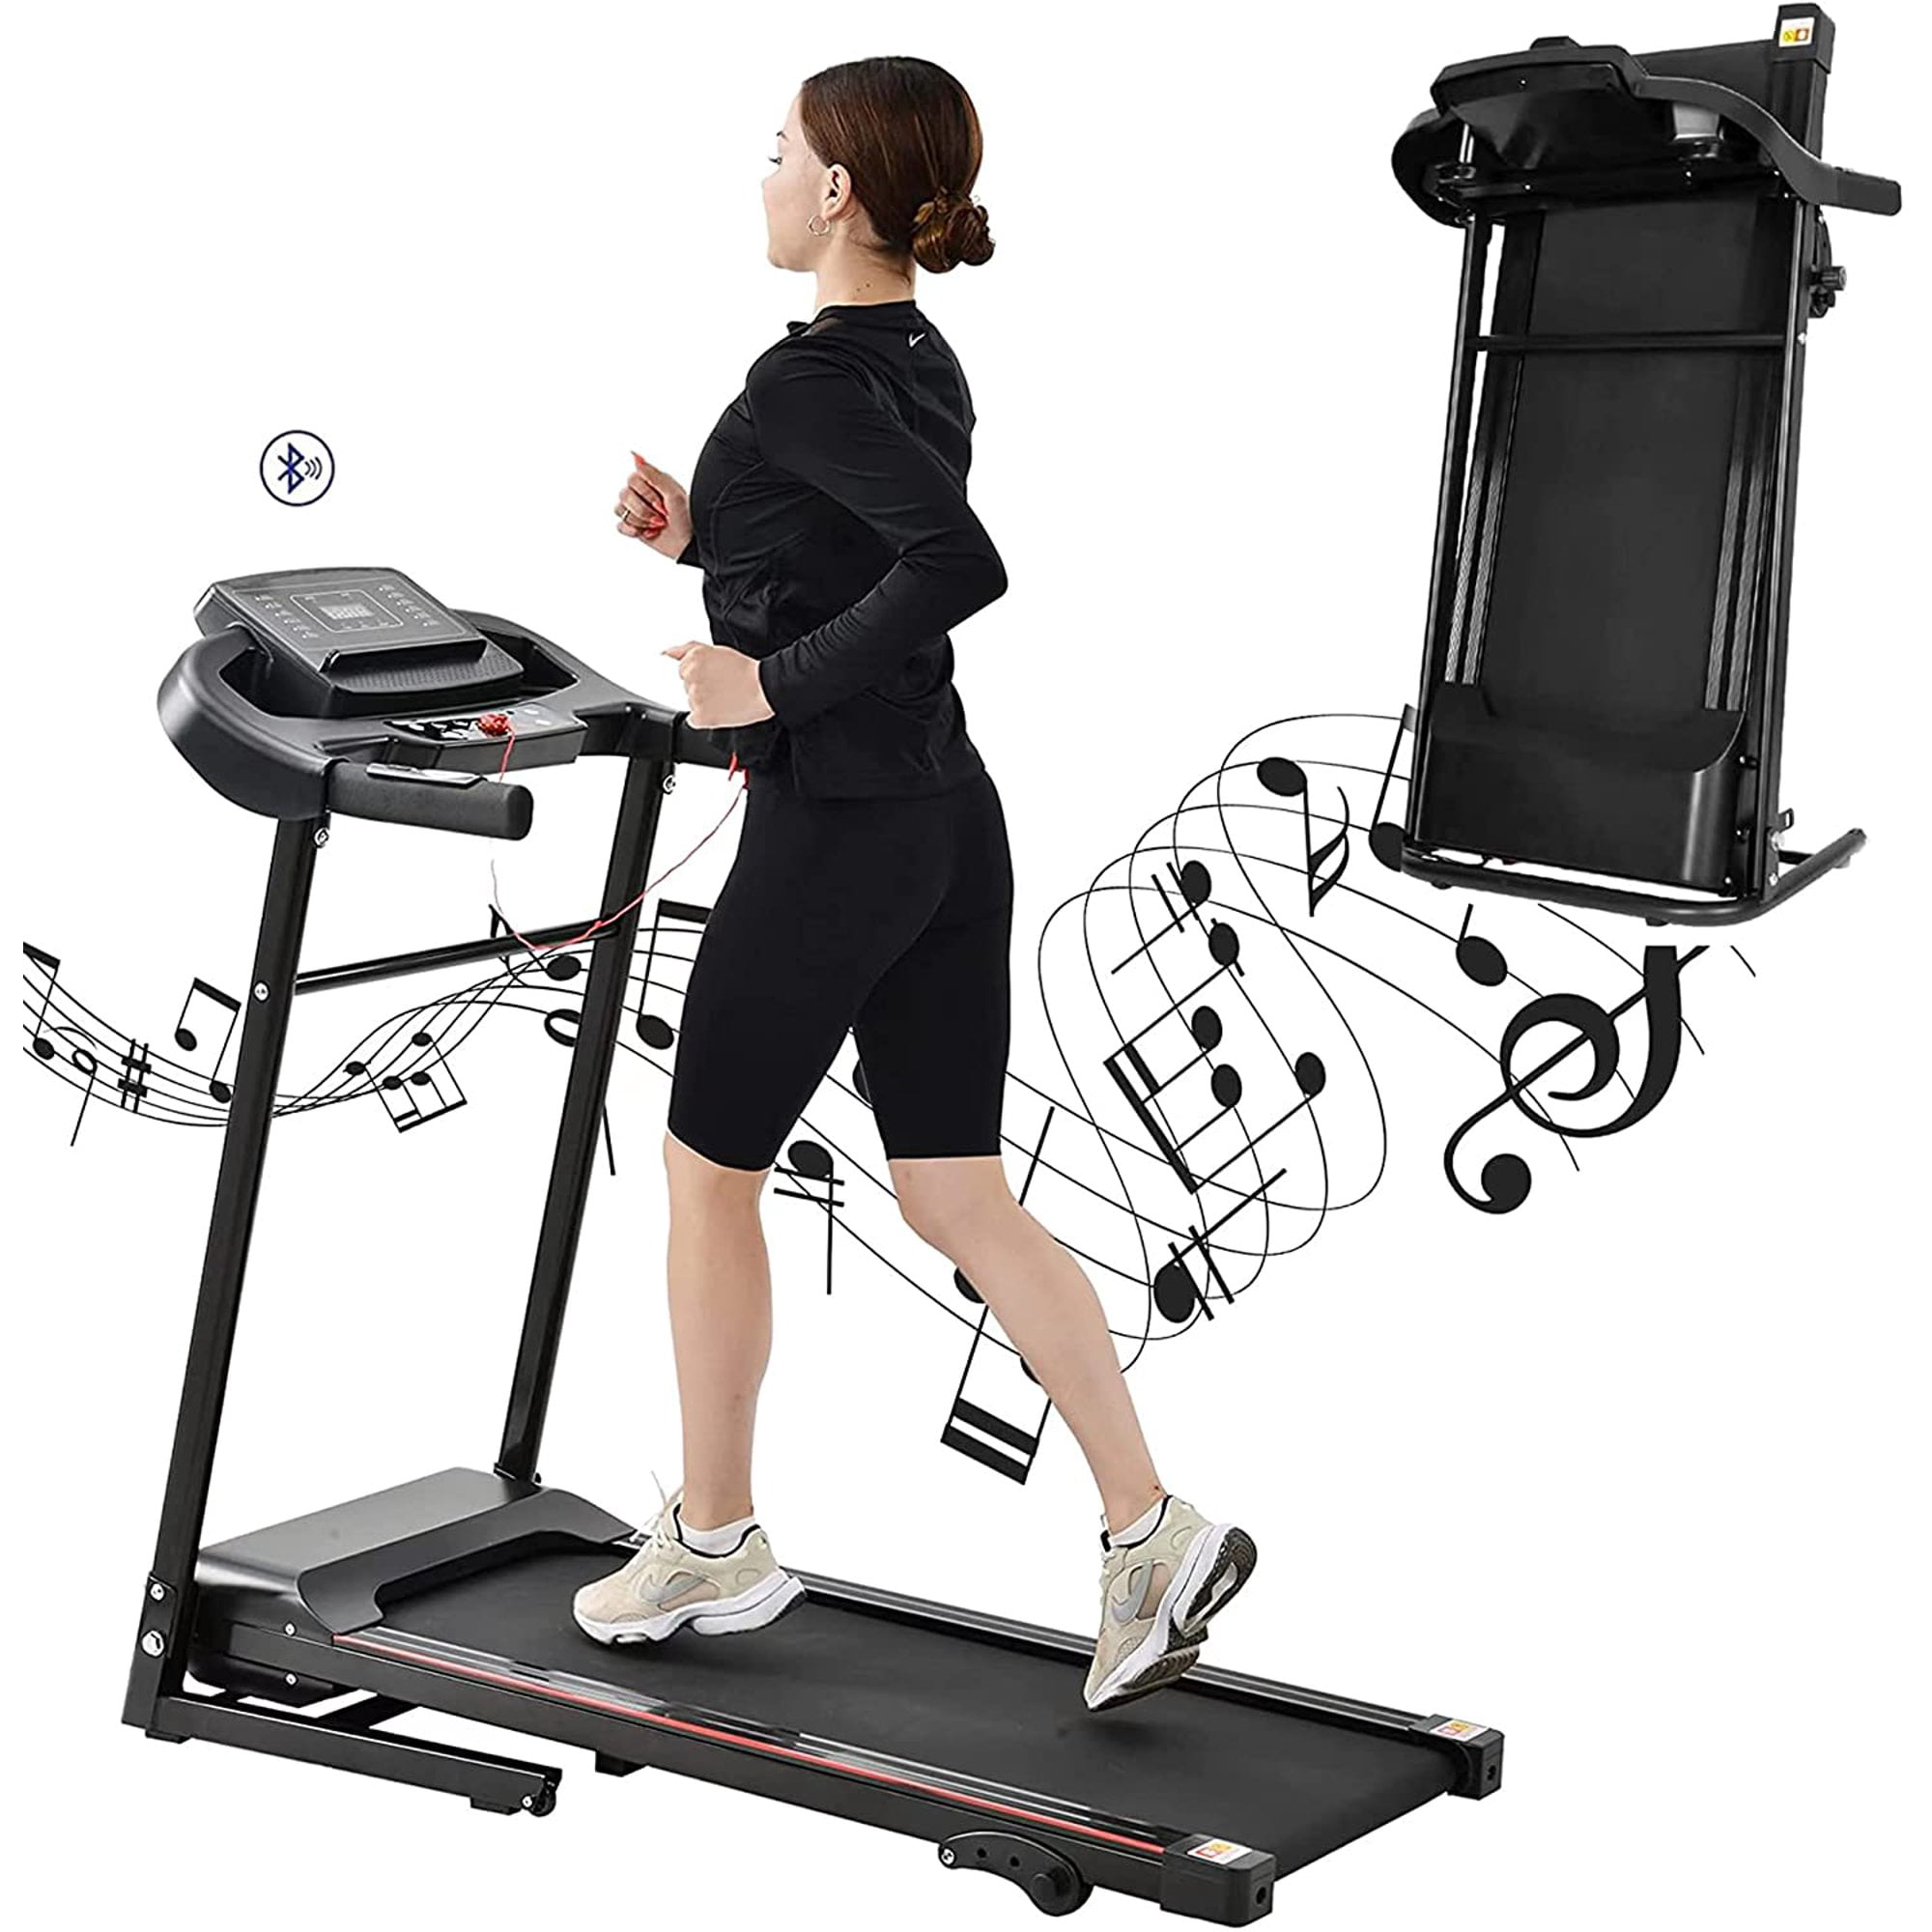 3D Vibration Platform Exercise Machine 1.0HP Full Body Fitness With Arm Straps 